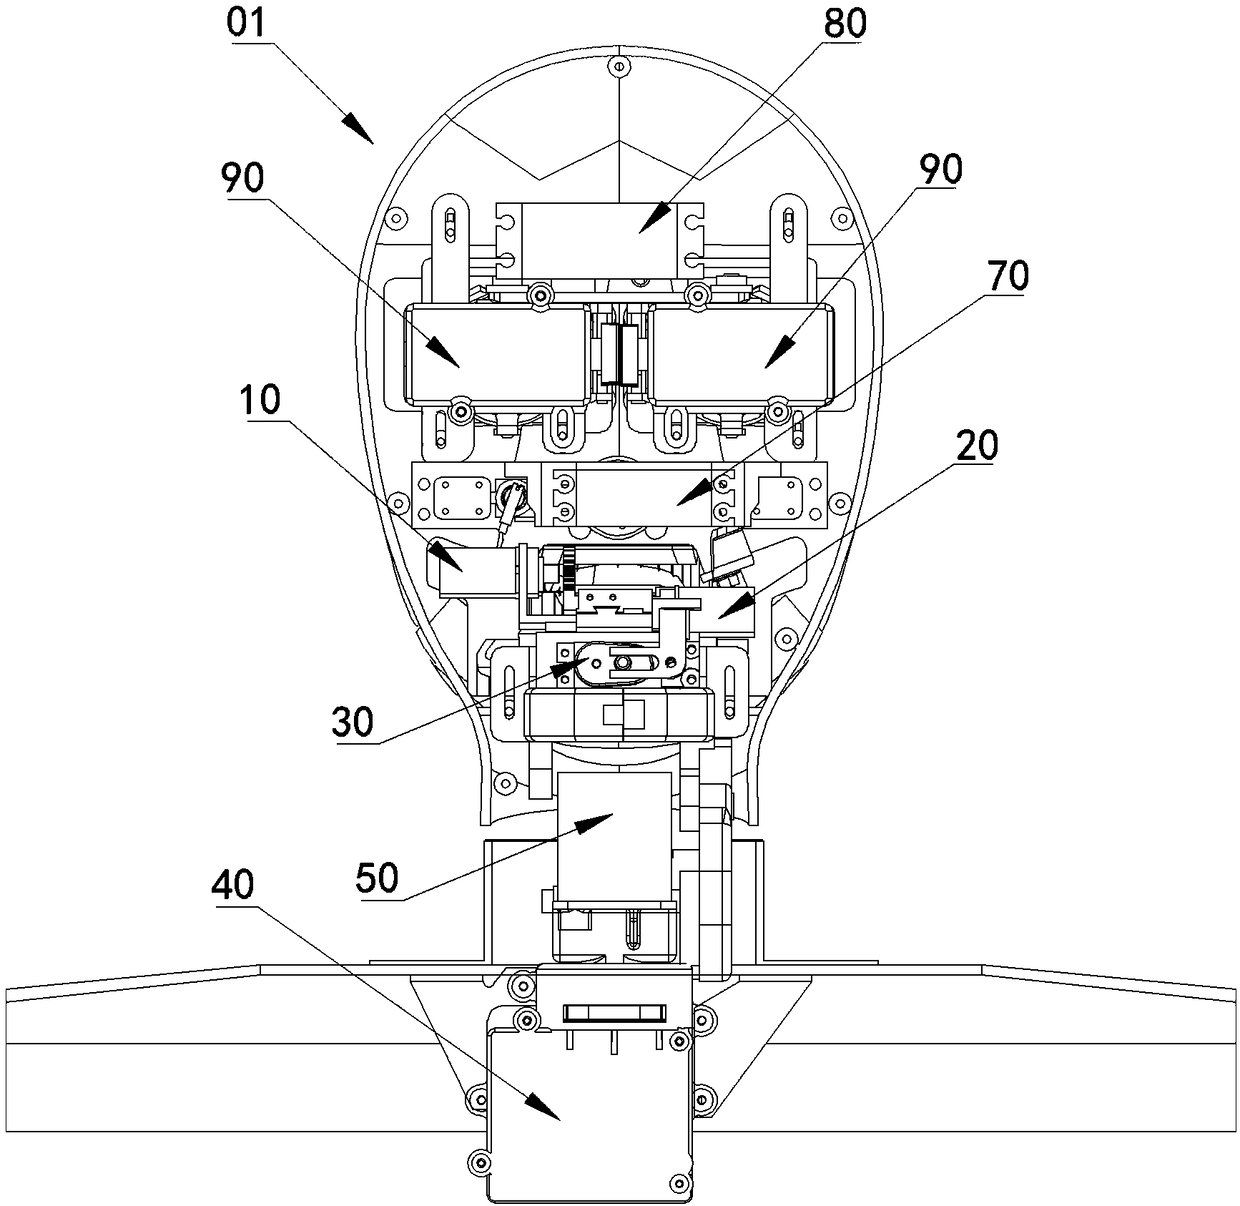 Robot head structure with tongue expression